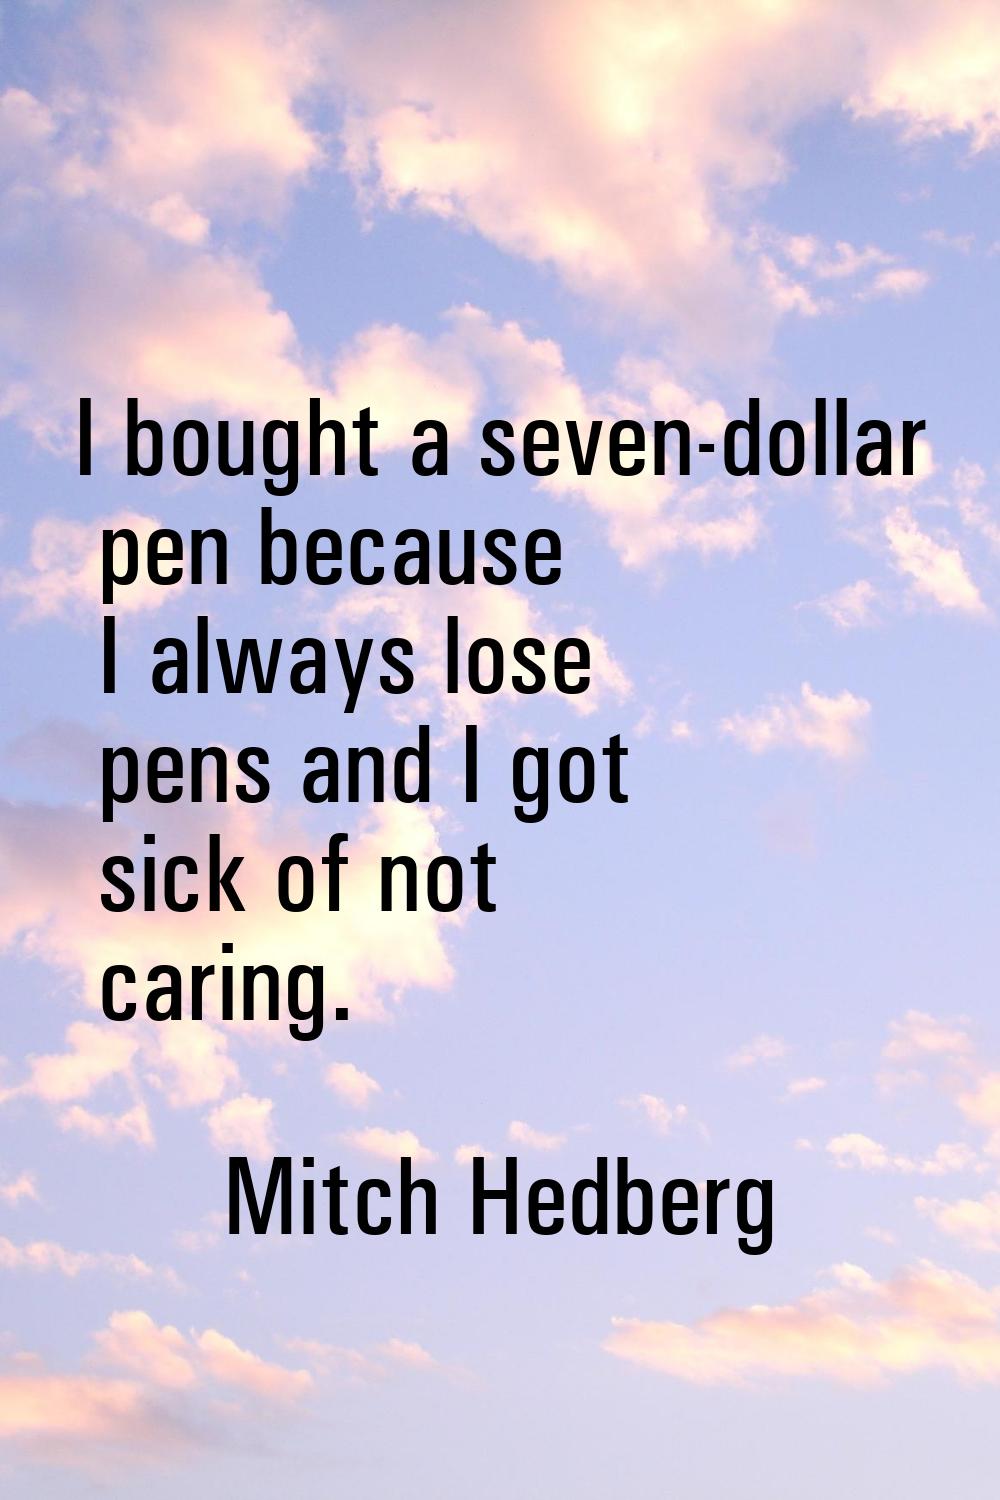 I bought a seven-dollar pen because I always lose pens and I got sick of not caring.